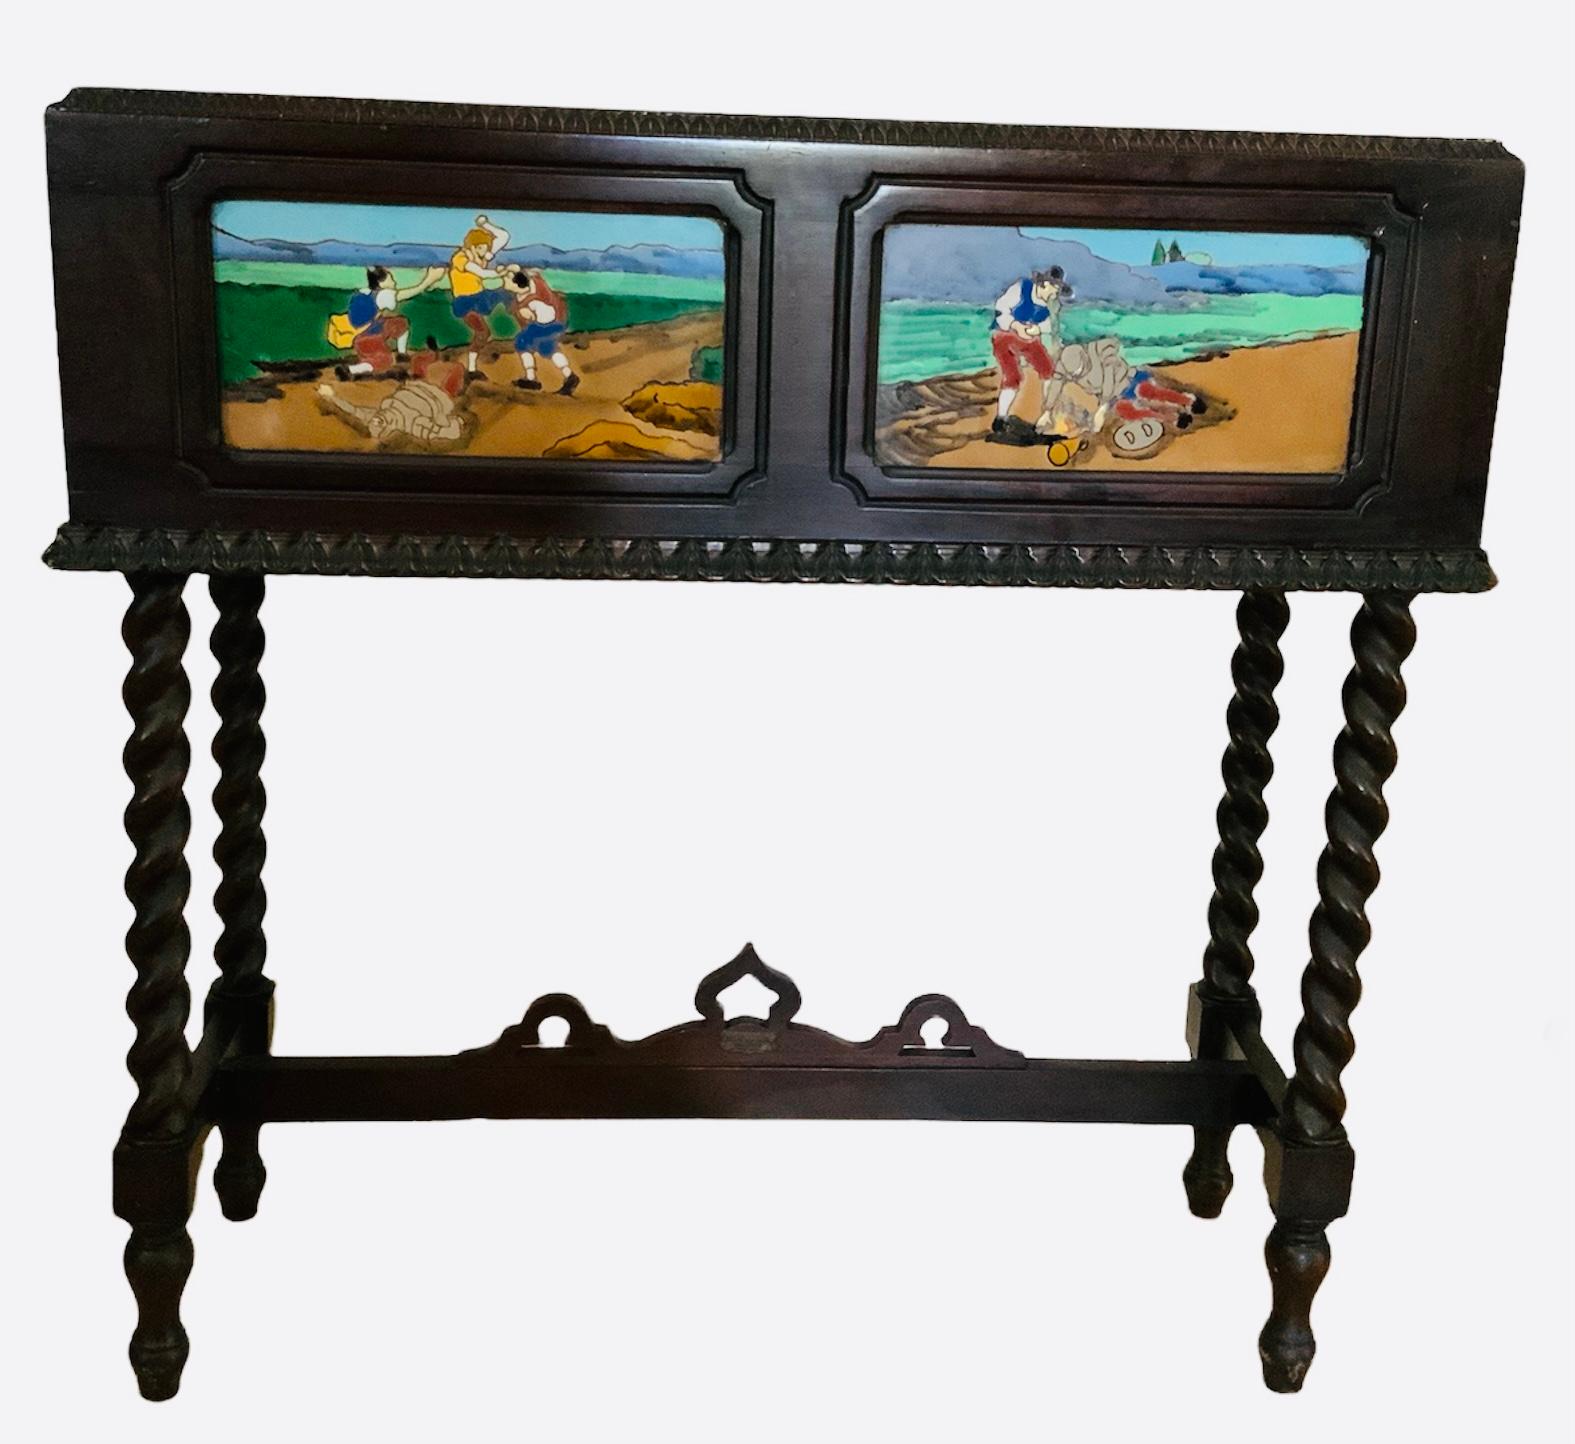 This is a rectangular shaped wood planter/jardiniere with inside metal liner. The wood background is painted black and decorated with hand painted tiles with scenes of the famous book of Miguel de Cervantes, Don Quixote. The planter is supported by